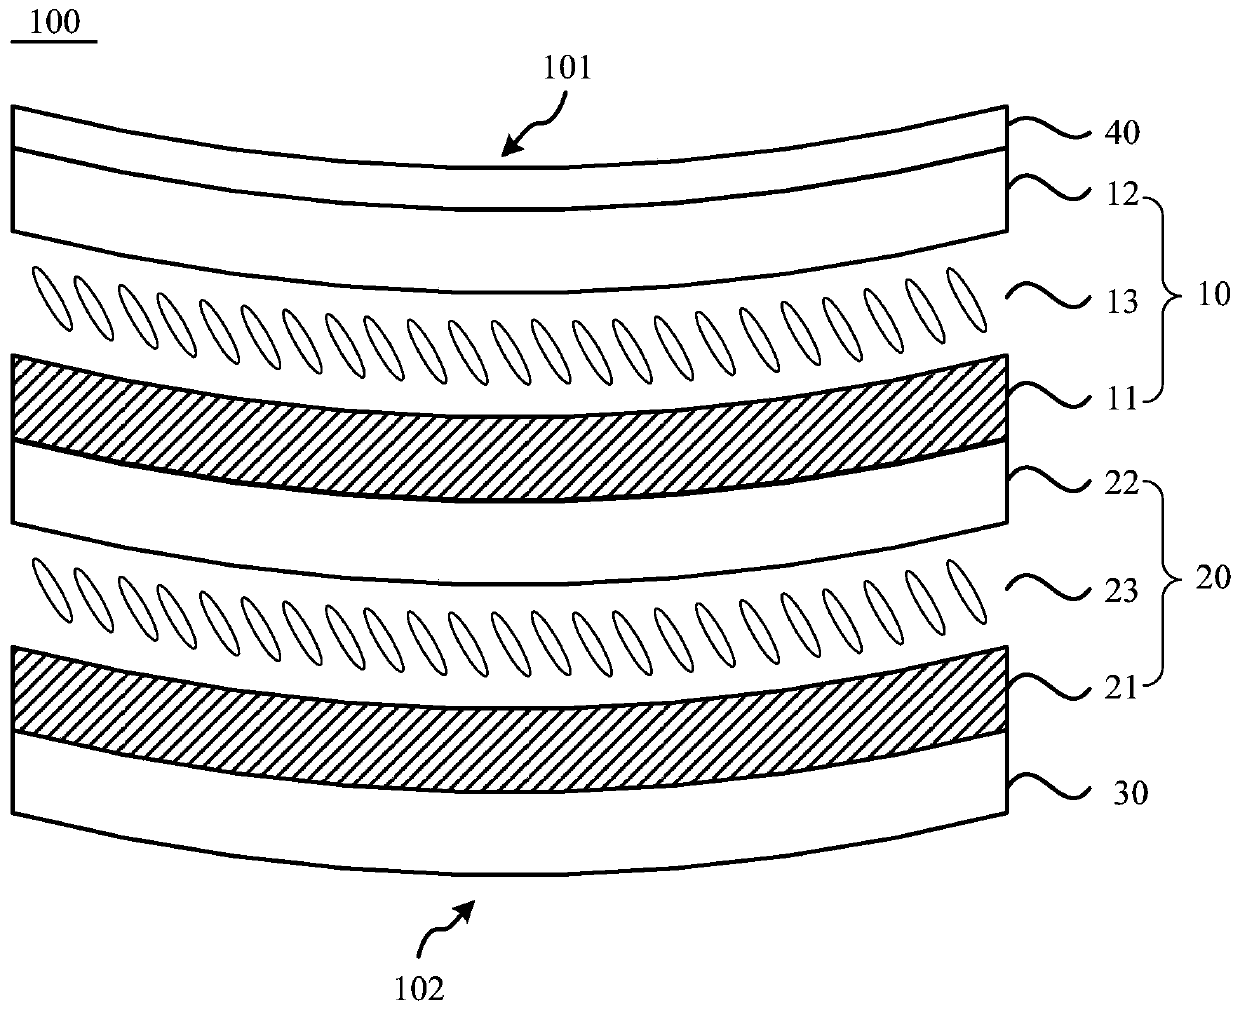 Curved liquid crystal display device and method for making the same